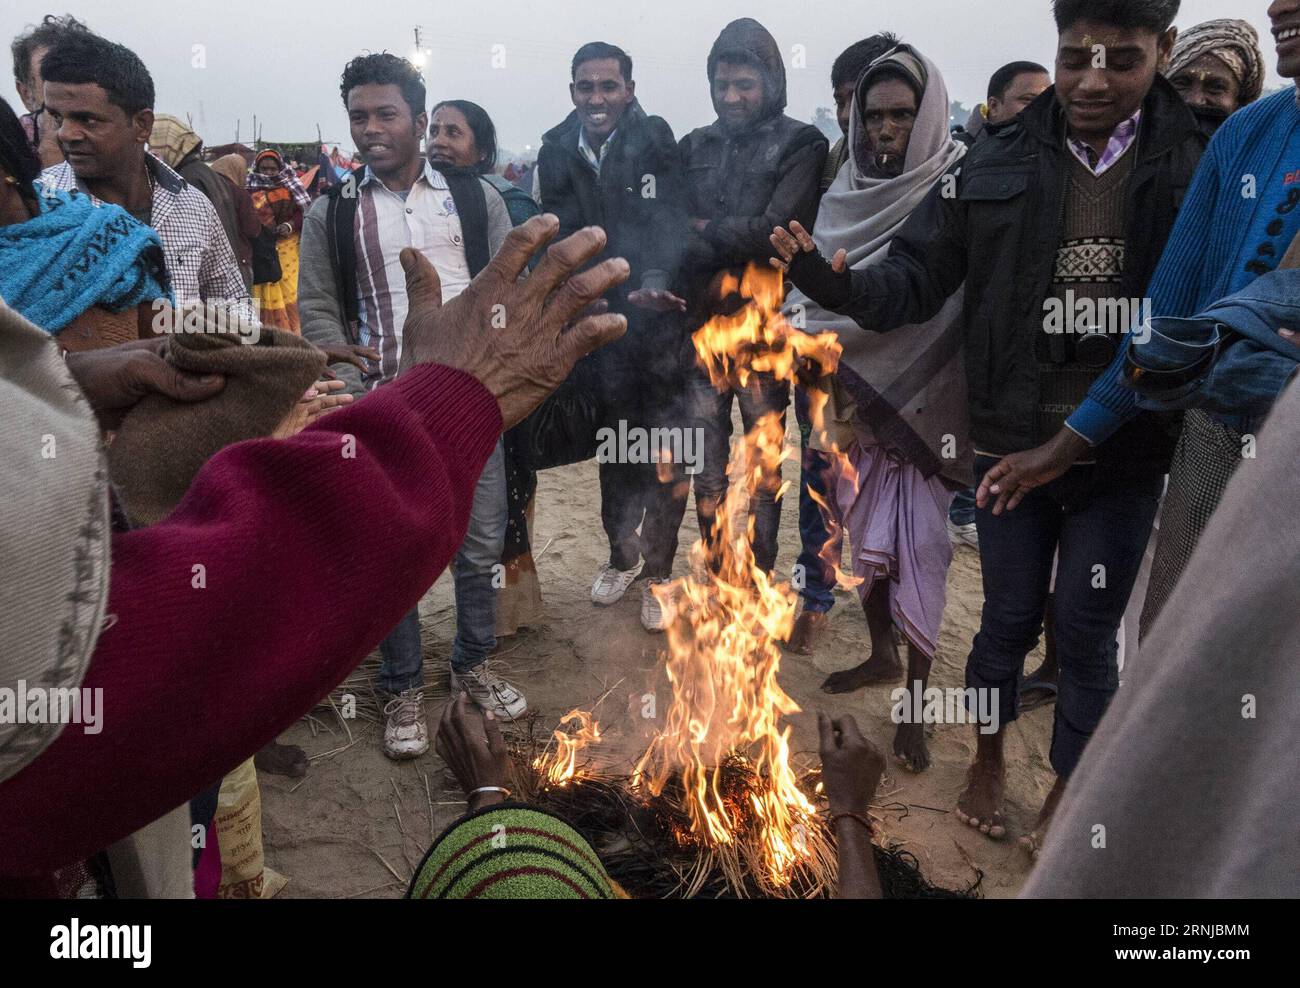 (170114) -- KOLKATA, Jan. 14, 2017 -- Indian Hindu devotees warm themselves around fire after taking holy dip in the Ajay river near the Joydev Fair, some 200km away from Kolkata, capital of eastern Indian state West Bengal, Jan. 14, 2017. A large number of Hindu pilgrims converge for the Joydev Fair on the occasion of Makar Sankranti, a holy day of the Hindu calendar, during which taking a dip is considered to be of great religious significance. ) (djj) INDIA-KOLKATA-MAKAR SANKRANTI-HOLY DIP TumpaxMondal PUBLICATIONxNOTxINxCHN   Kolkata Jan 14 2017 Indian Hindu devotees warm themselves Around Stock Photo